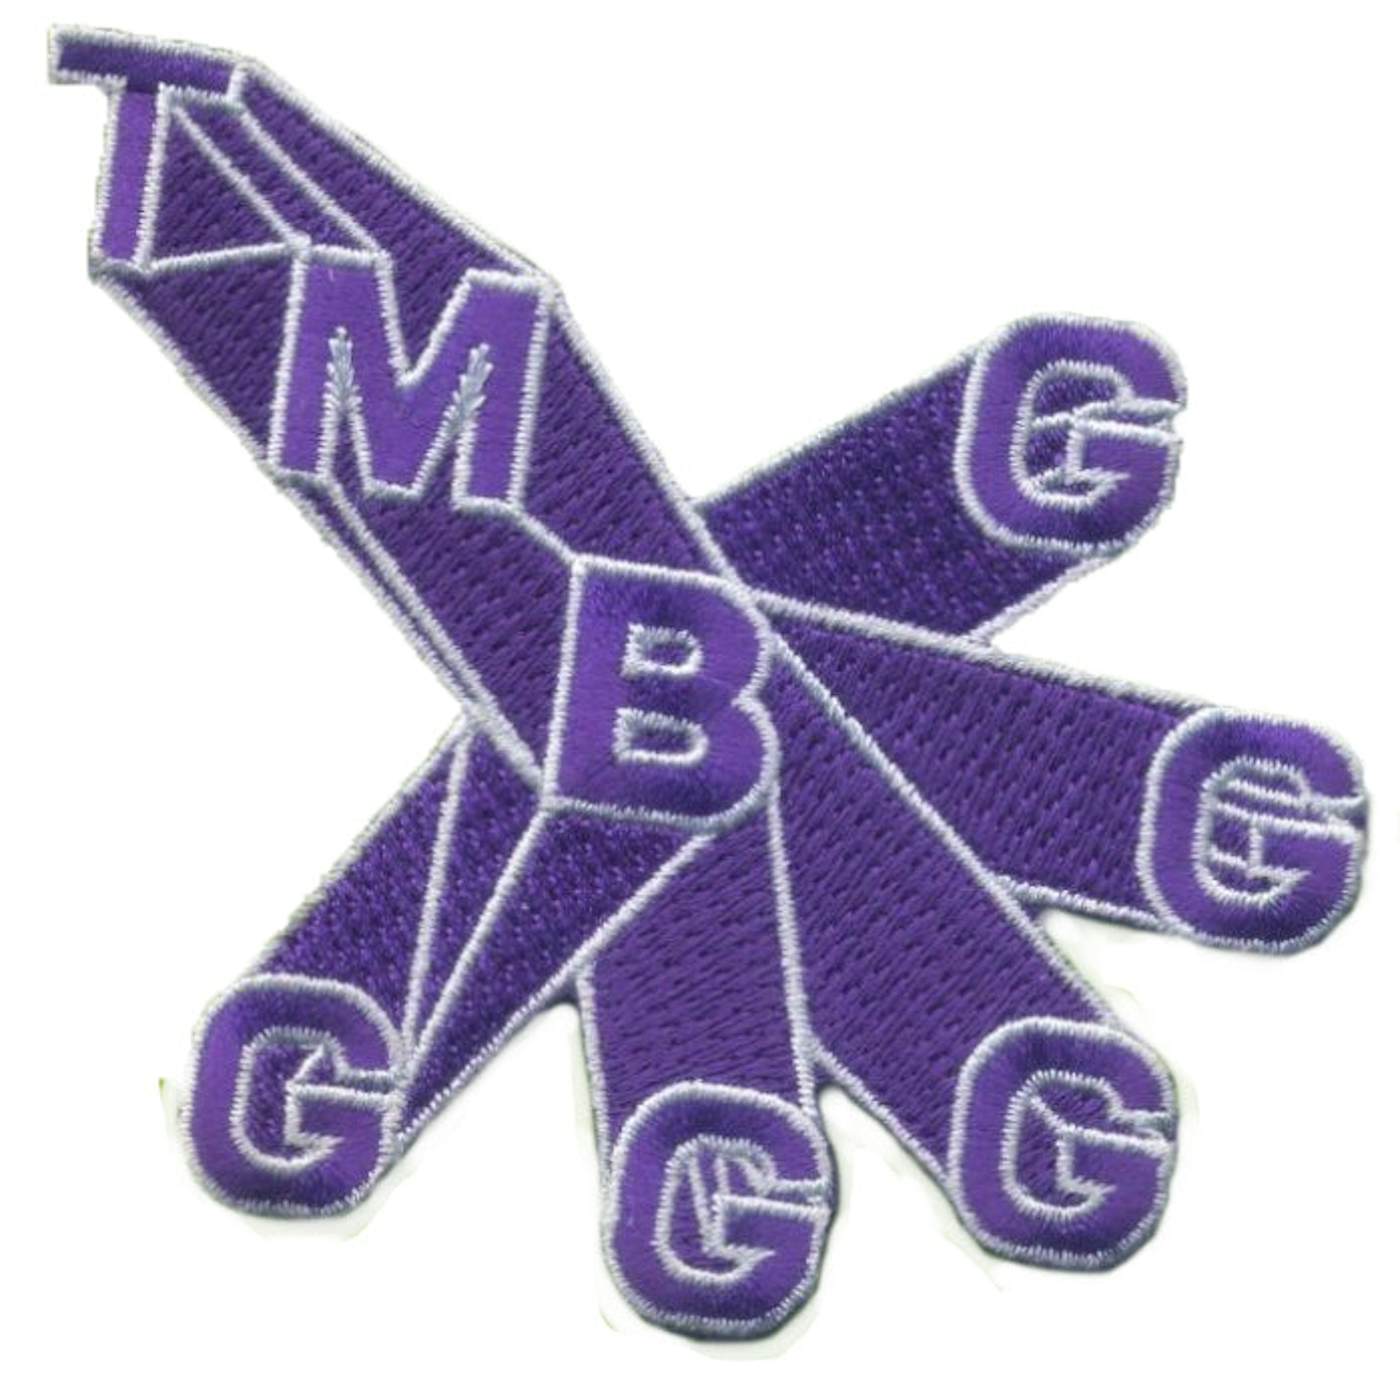 They Might Be Giants Leggs Patch